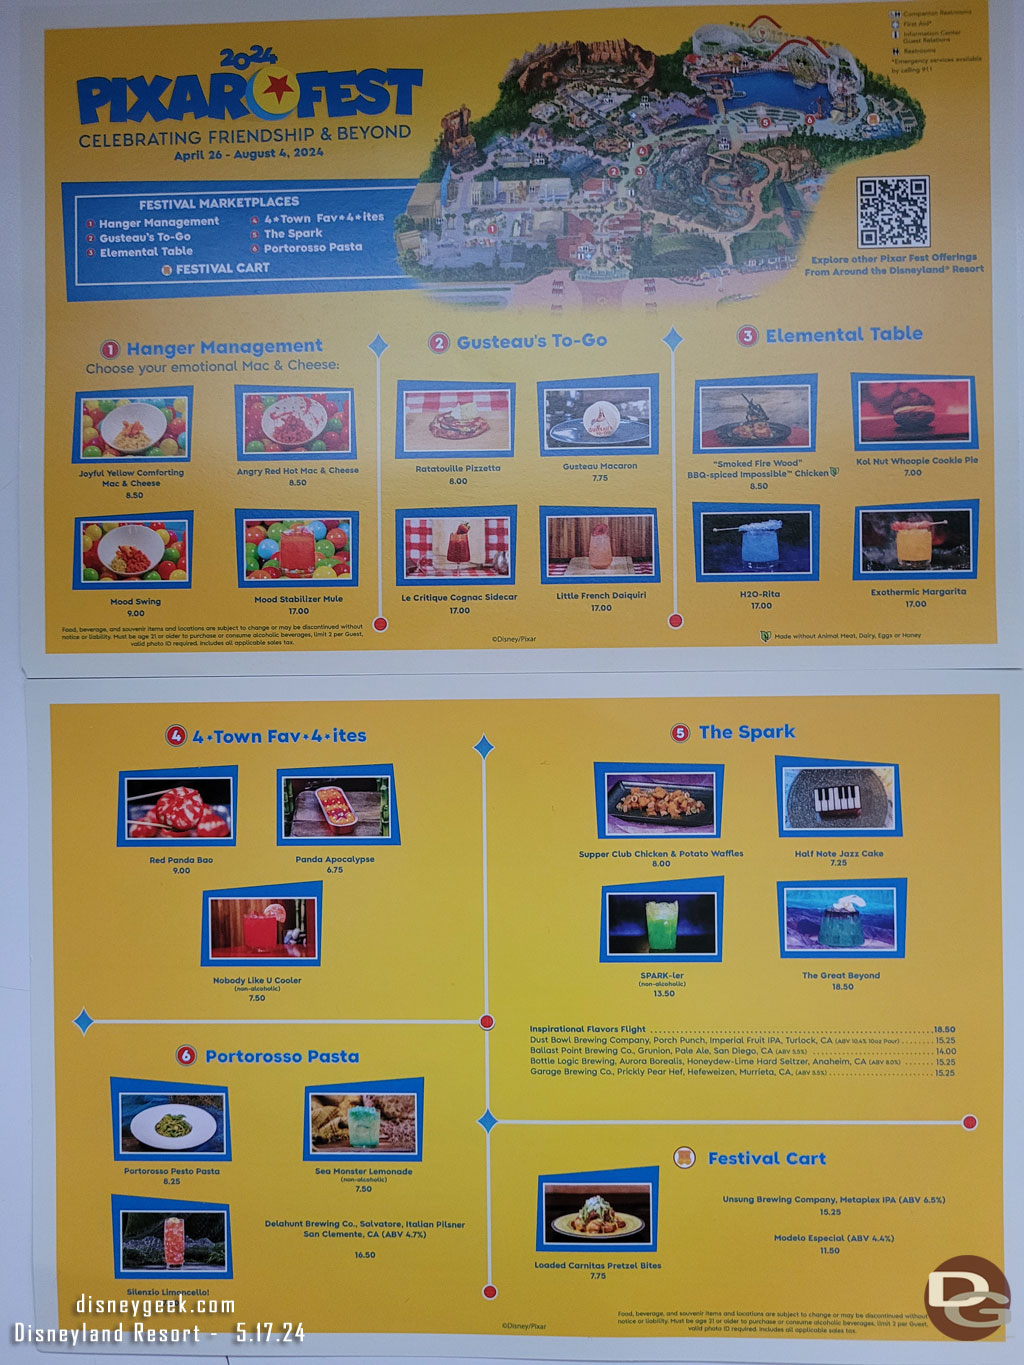 This half page flyer lists the marketplaces and the menus for each